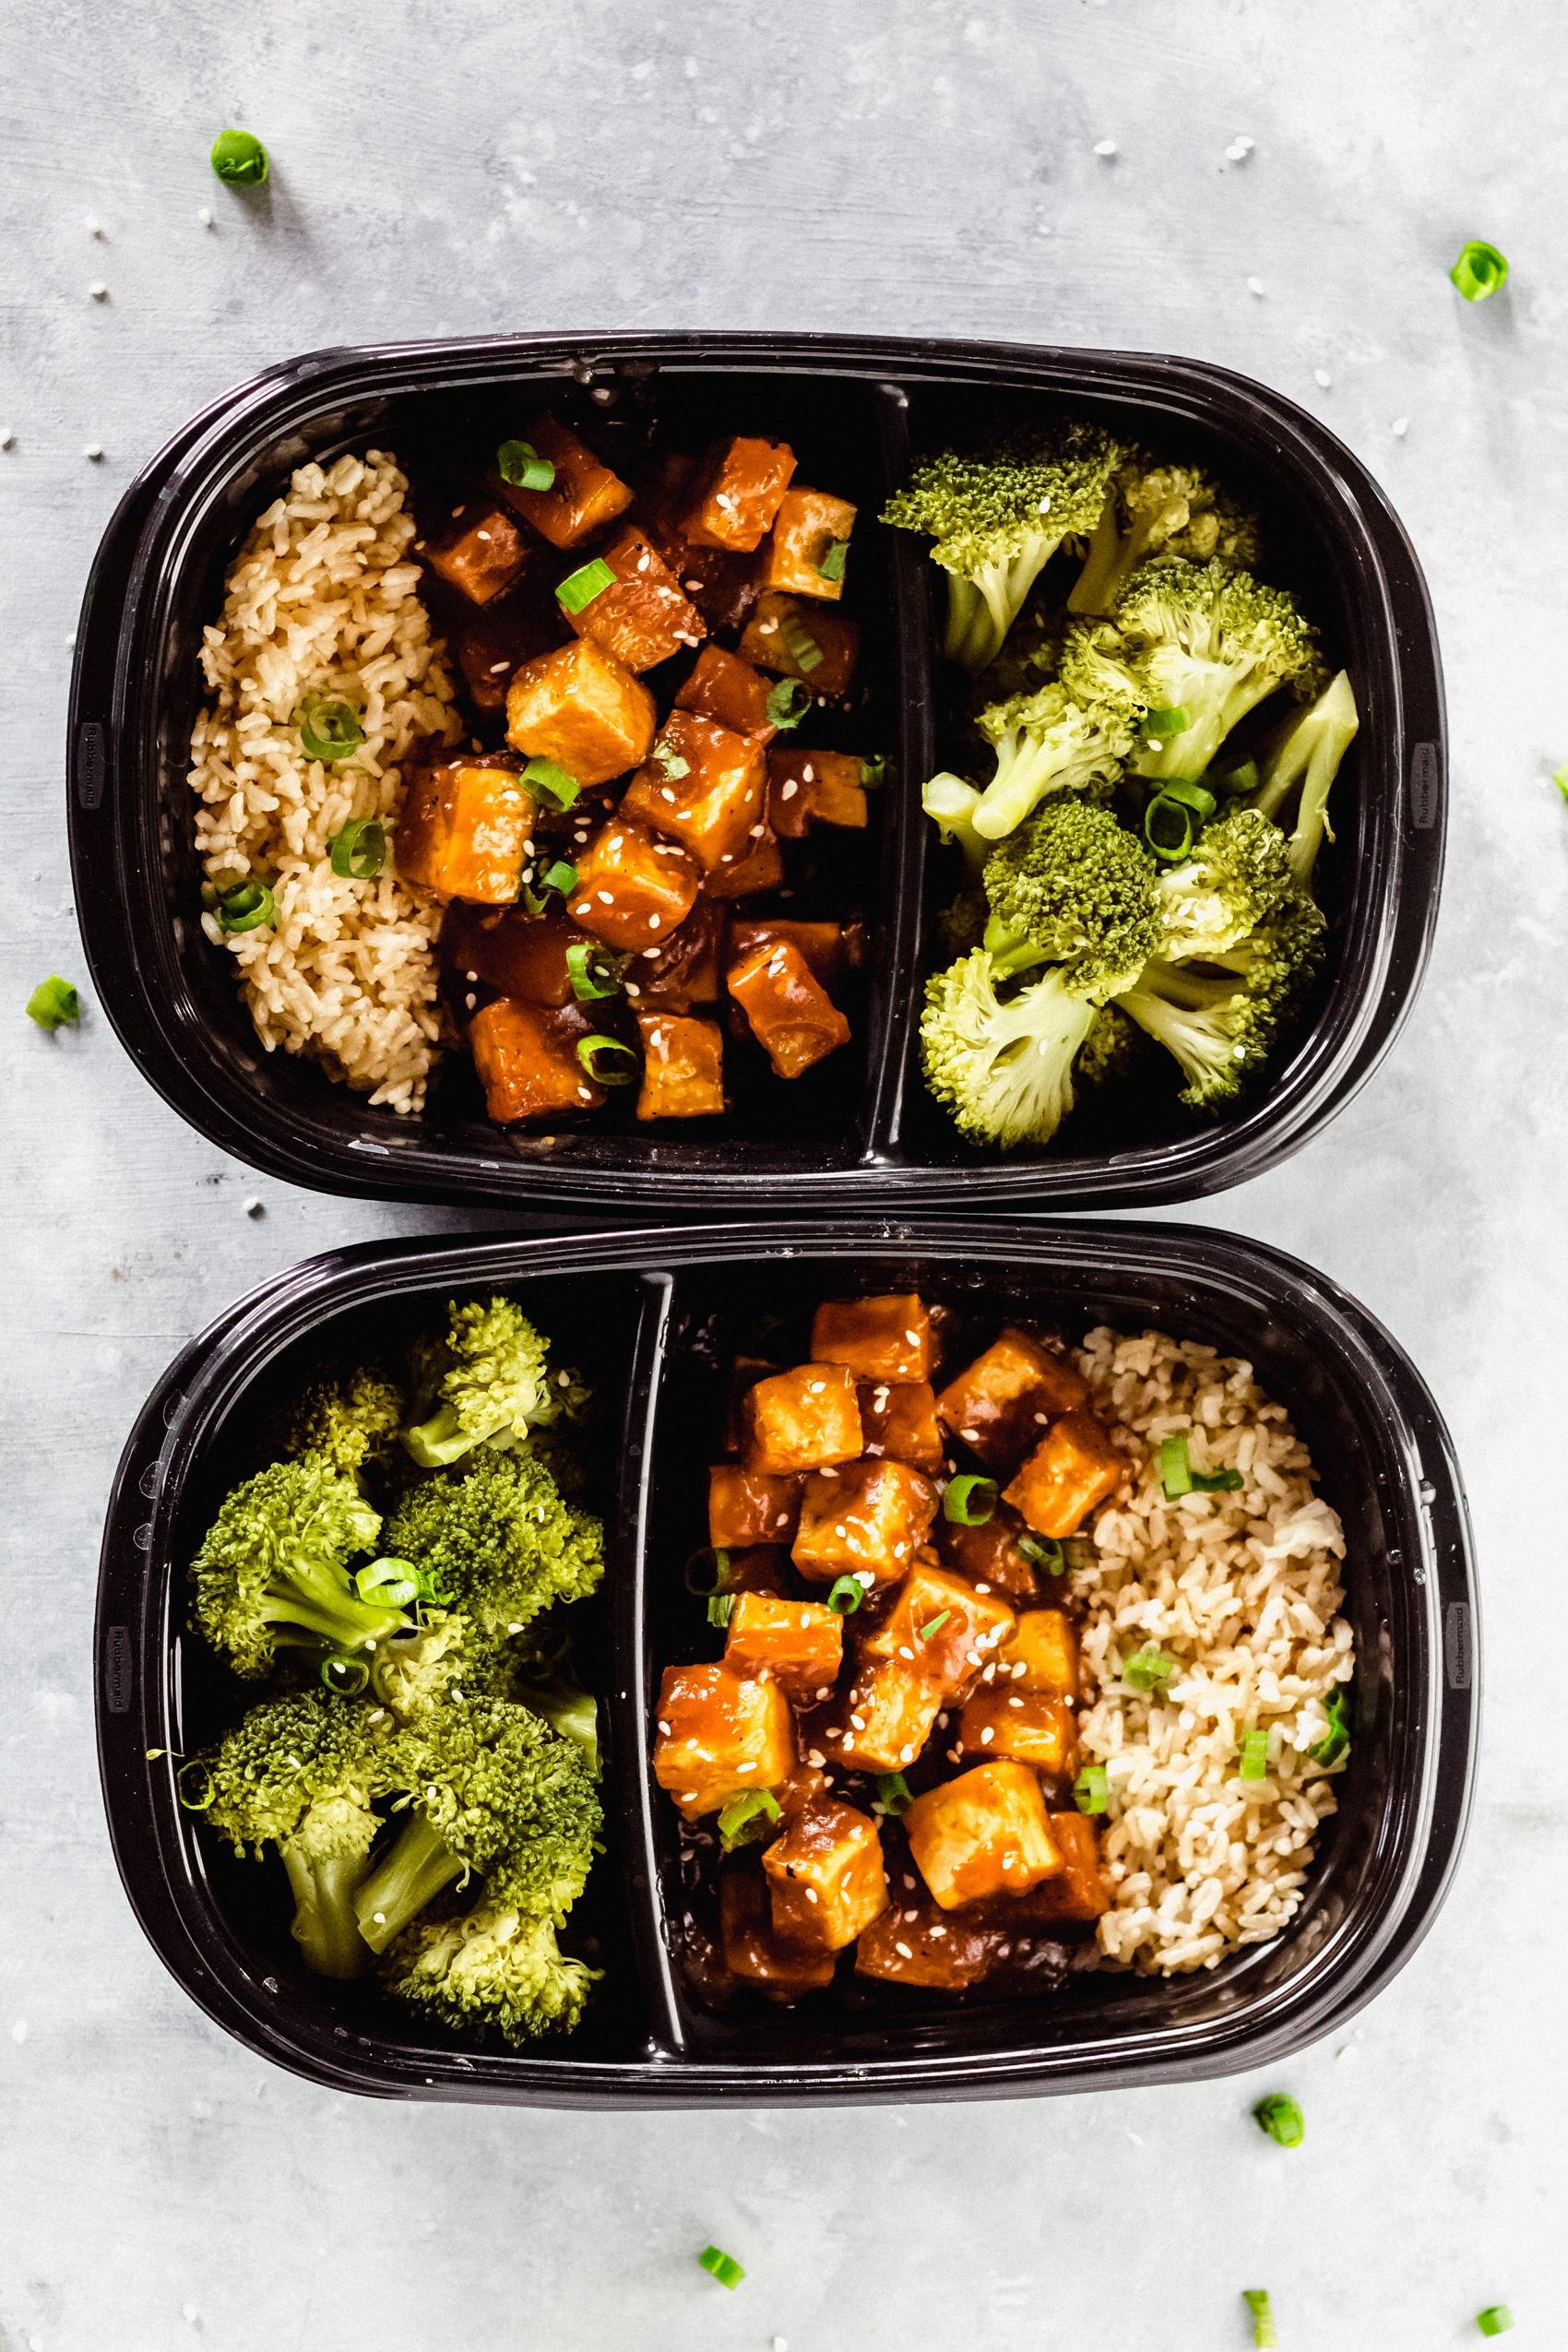 tofu, broccoli, and brown rice in a meal prep container